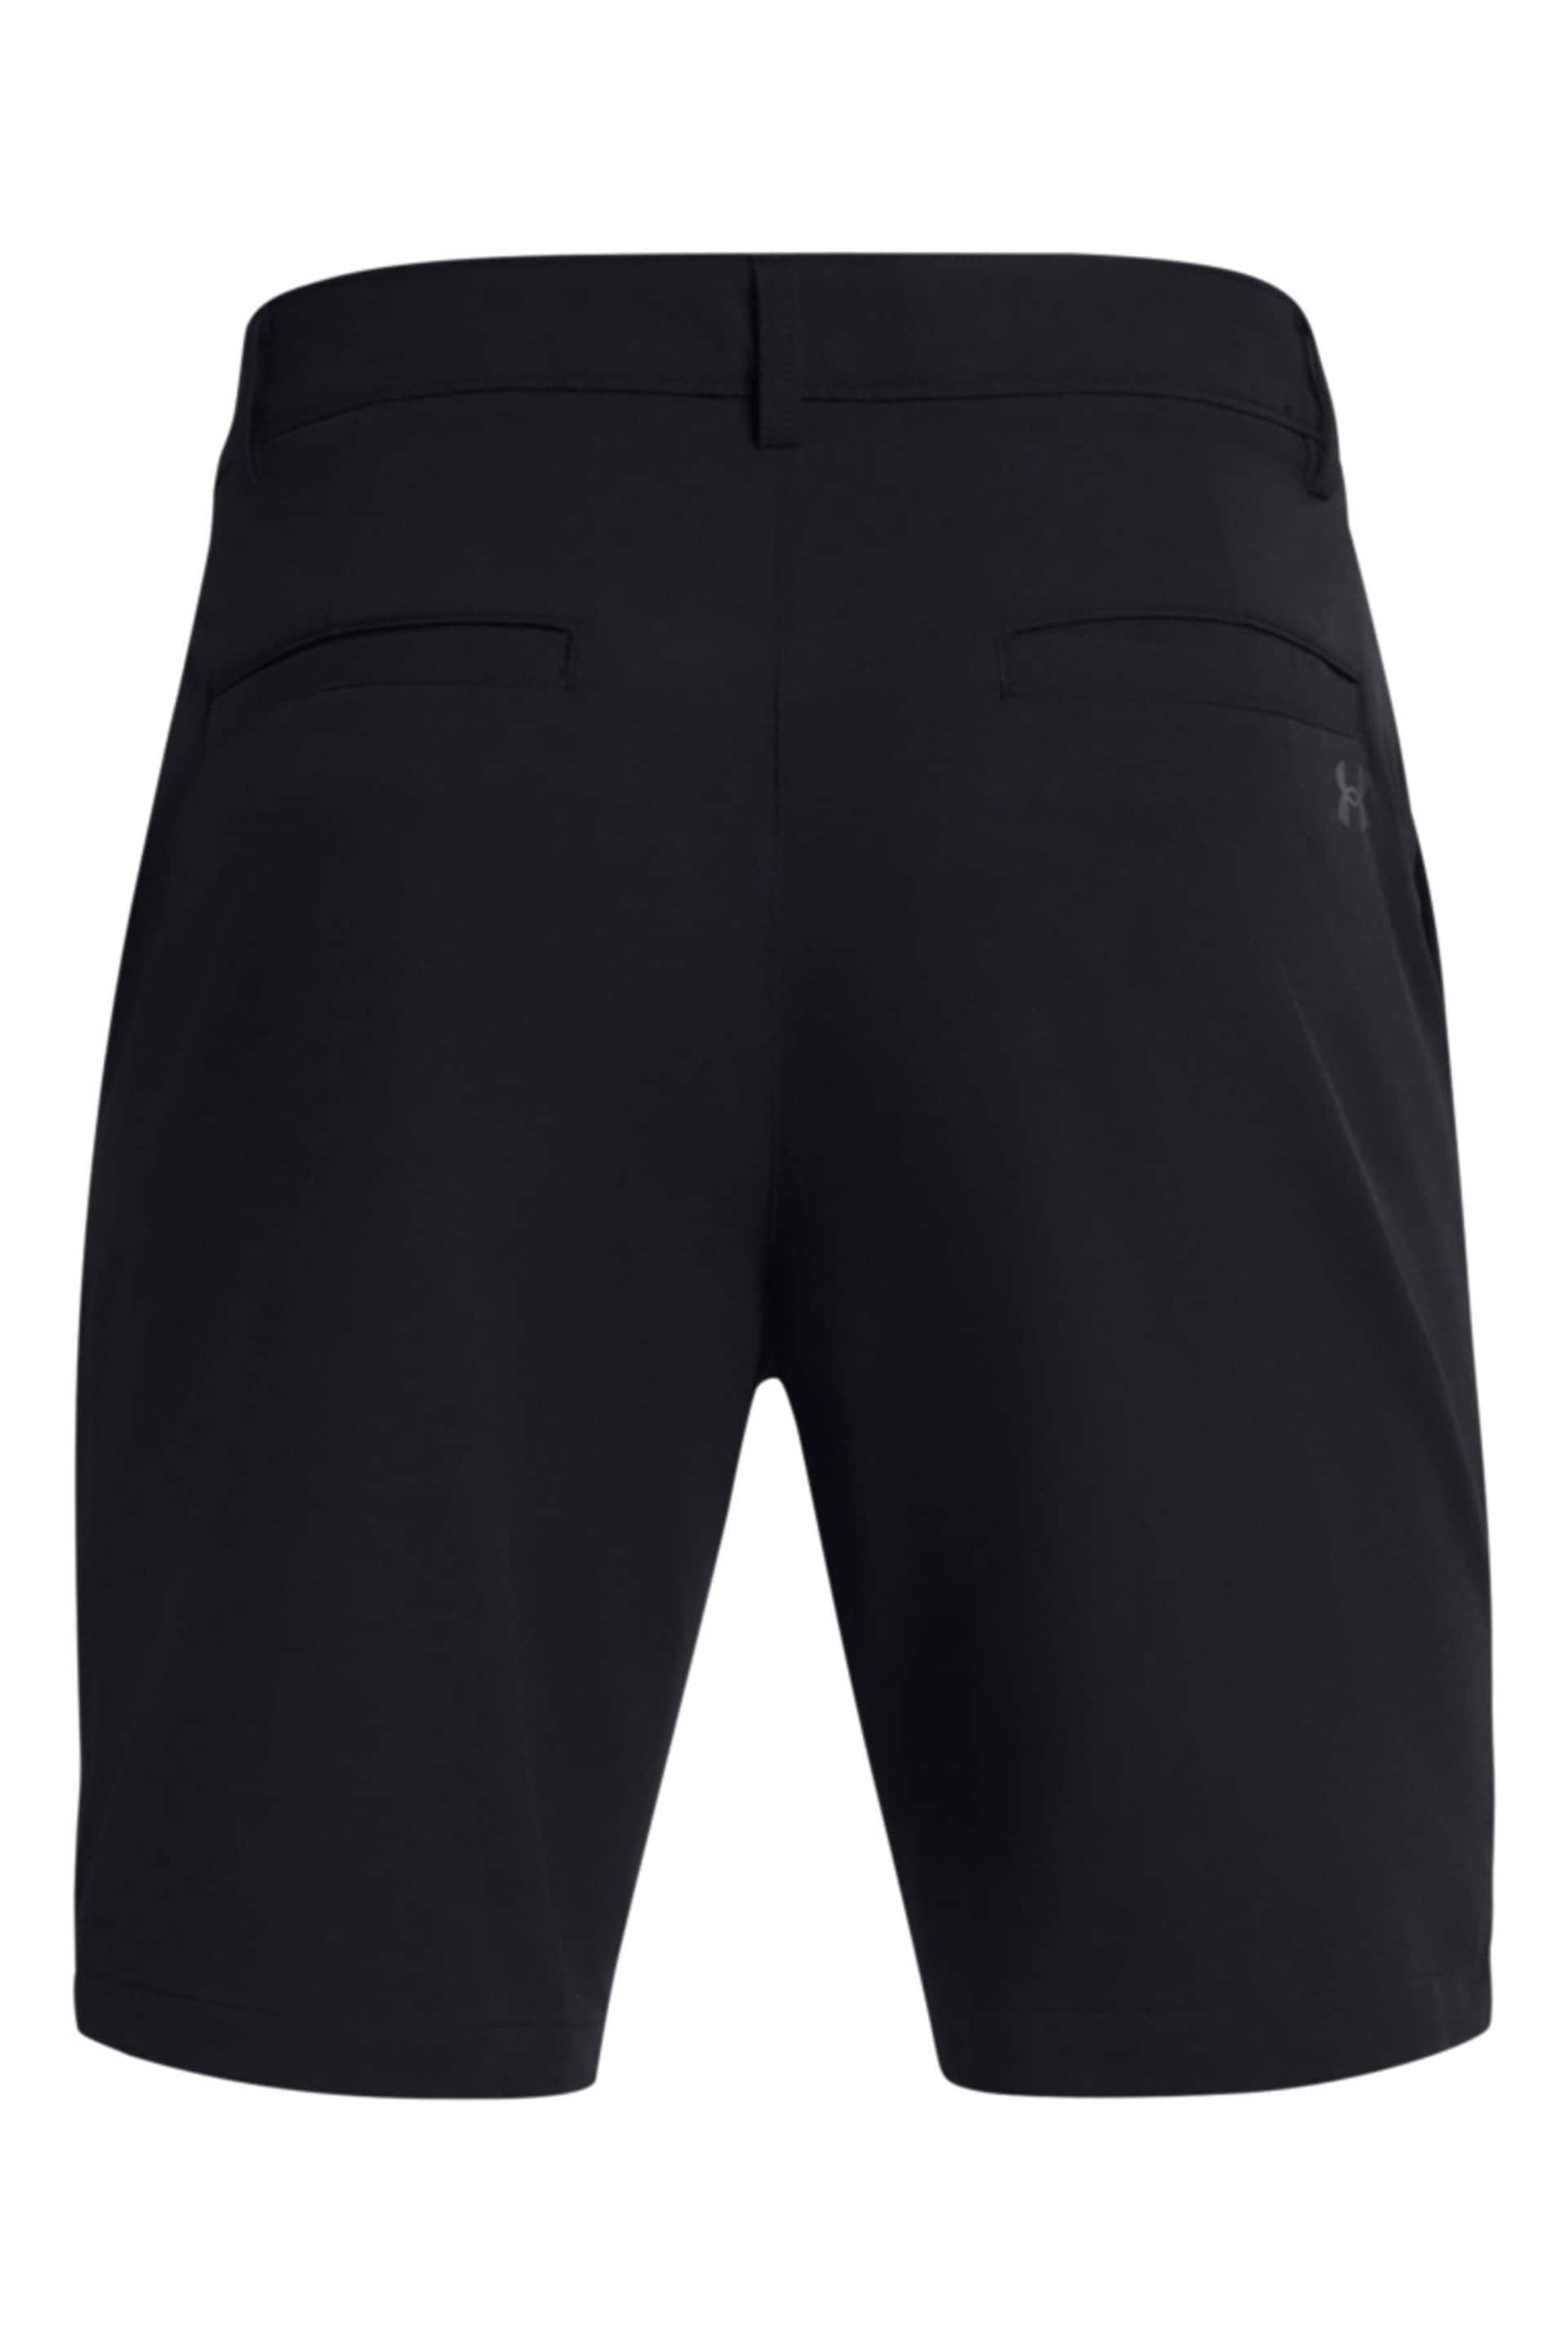 Under Armour Black Tech Taper Shorts - Image 6 of 6